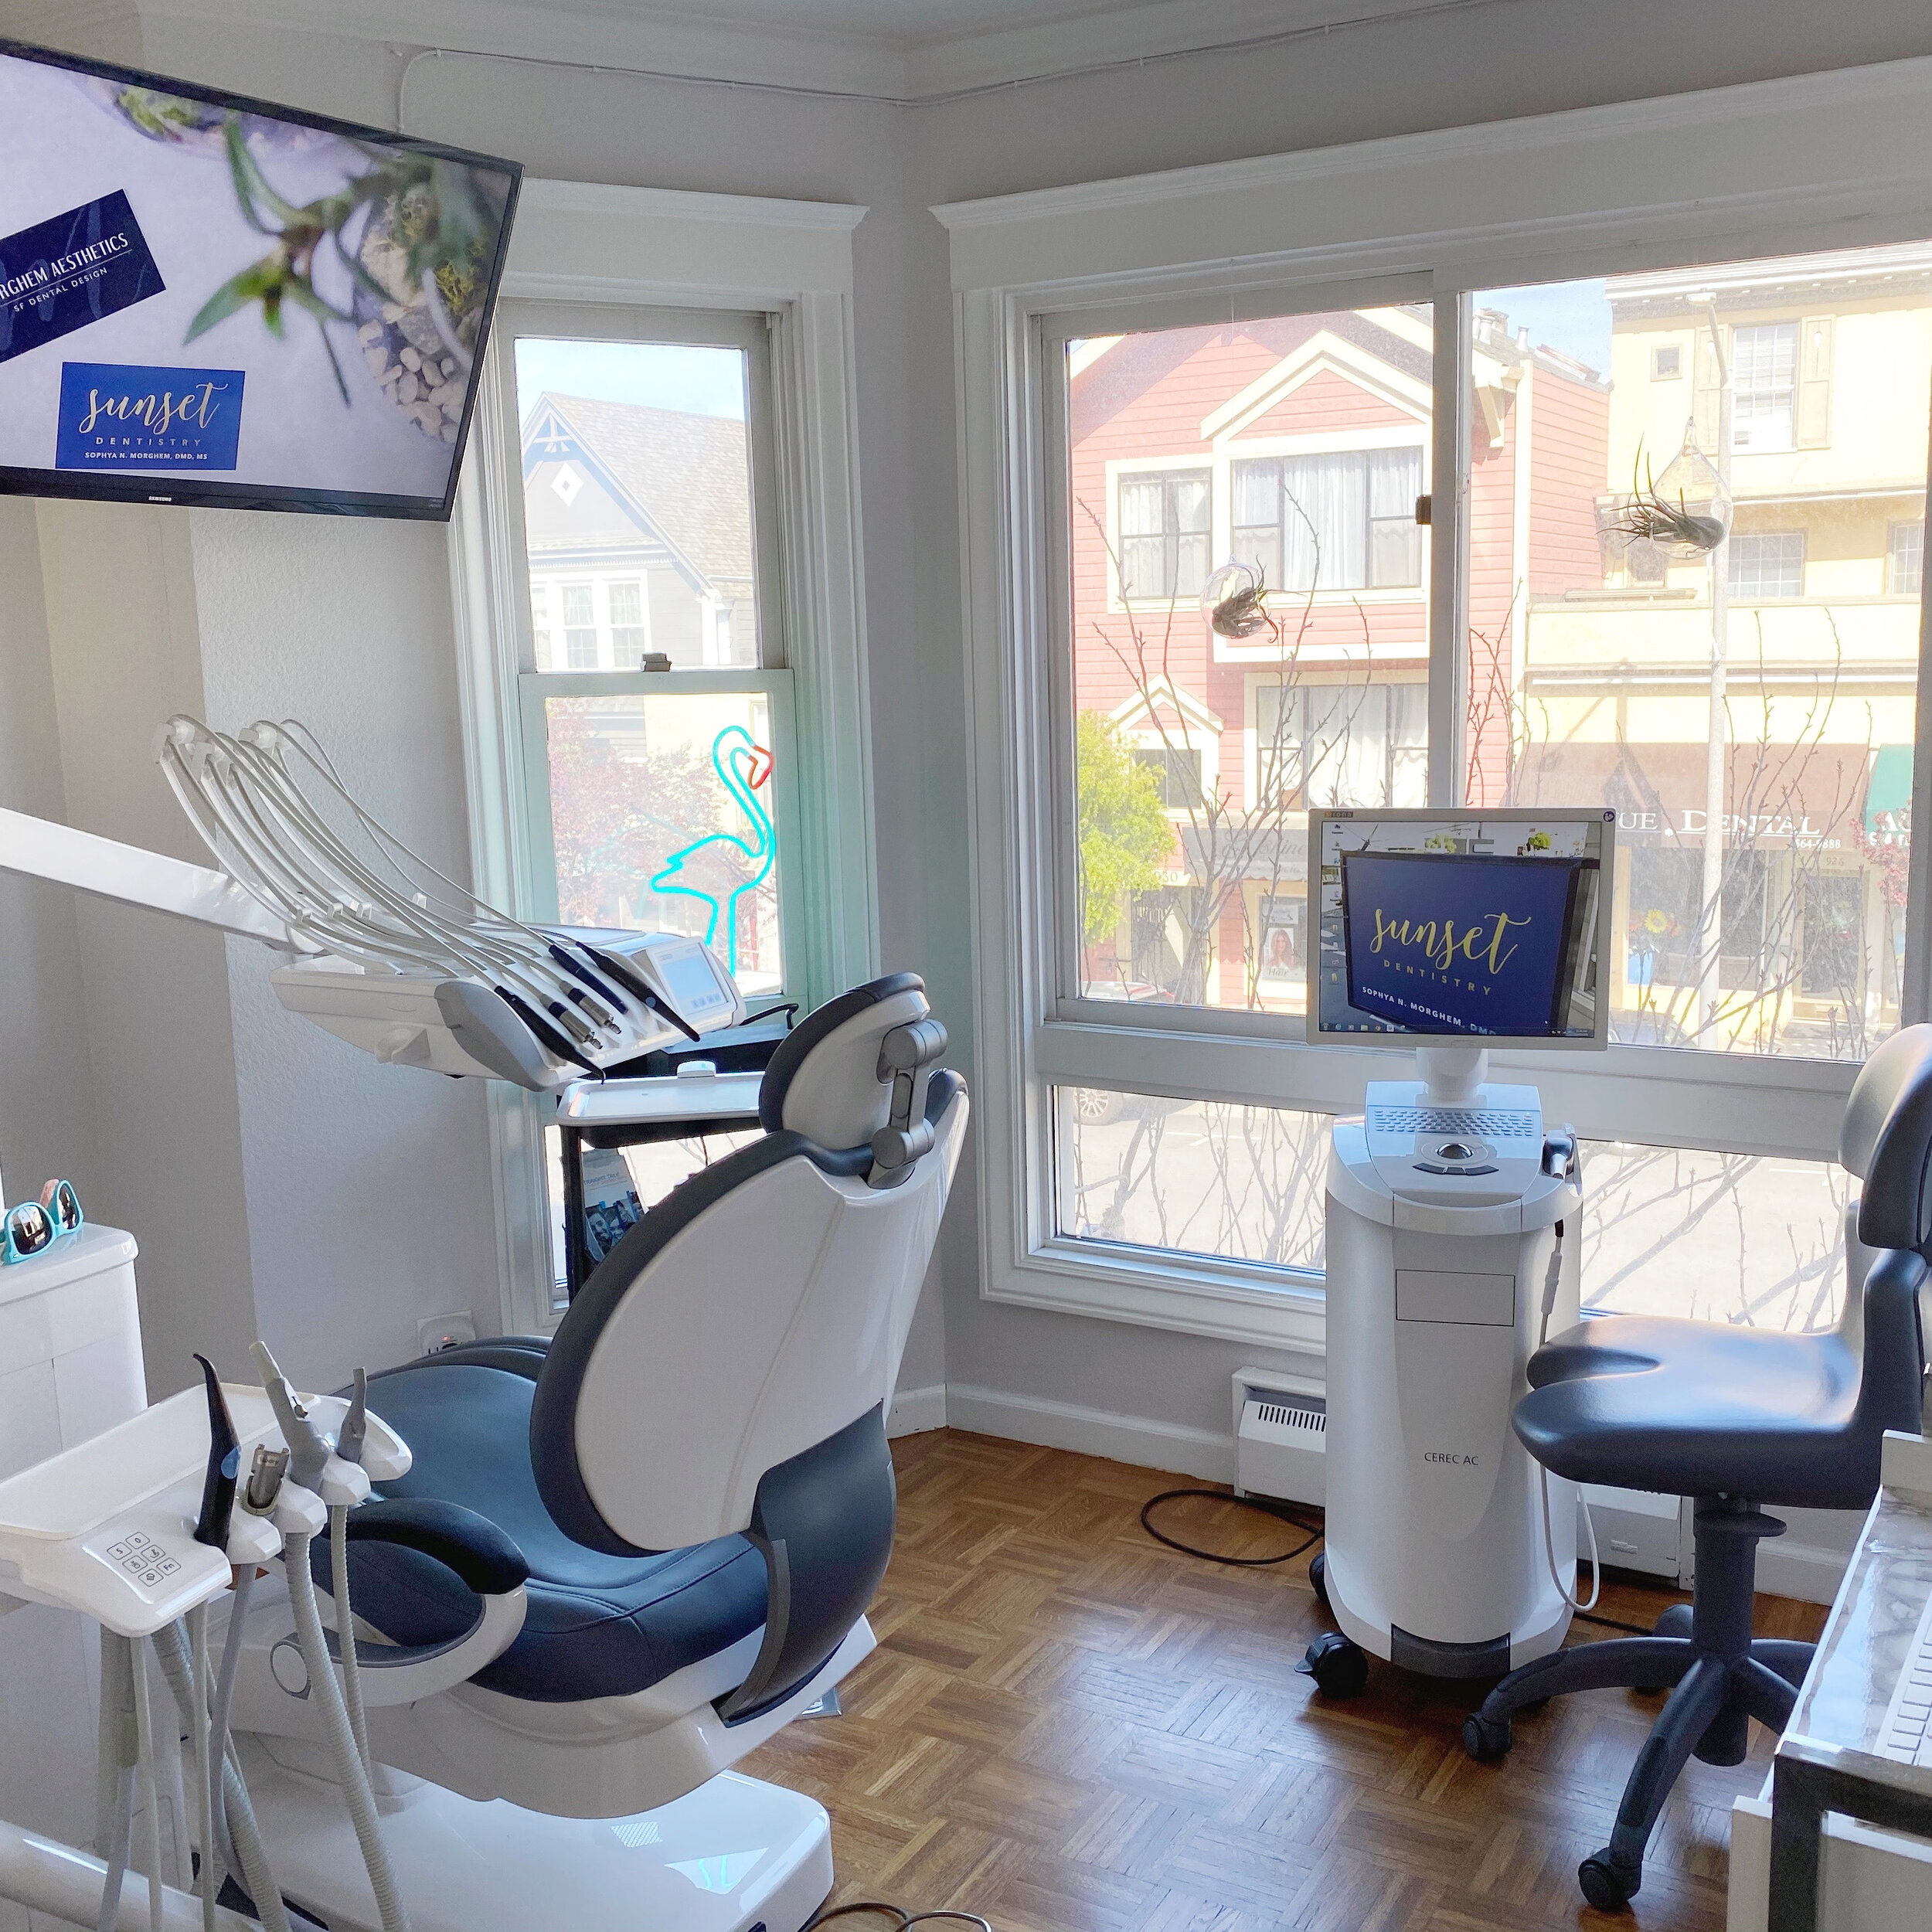 What to do when you have a toothache but nothing is open. What constitutes a dental emergency. Although all dental offices were instructed to close during this COVID-19 pandemic until April 7, 2020, we are healthcare professionals that are available…